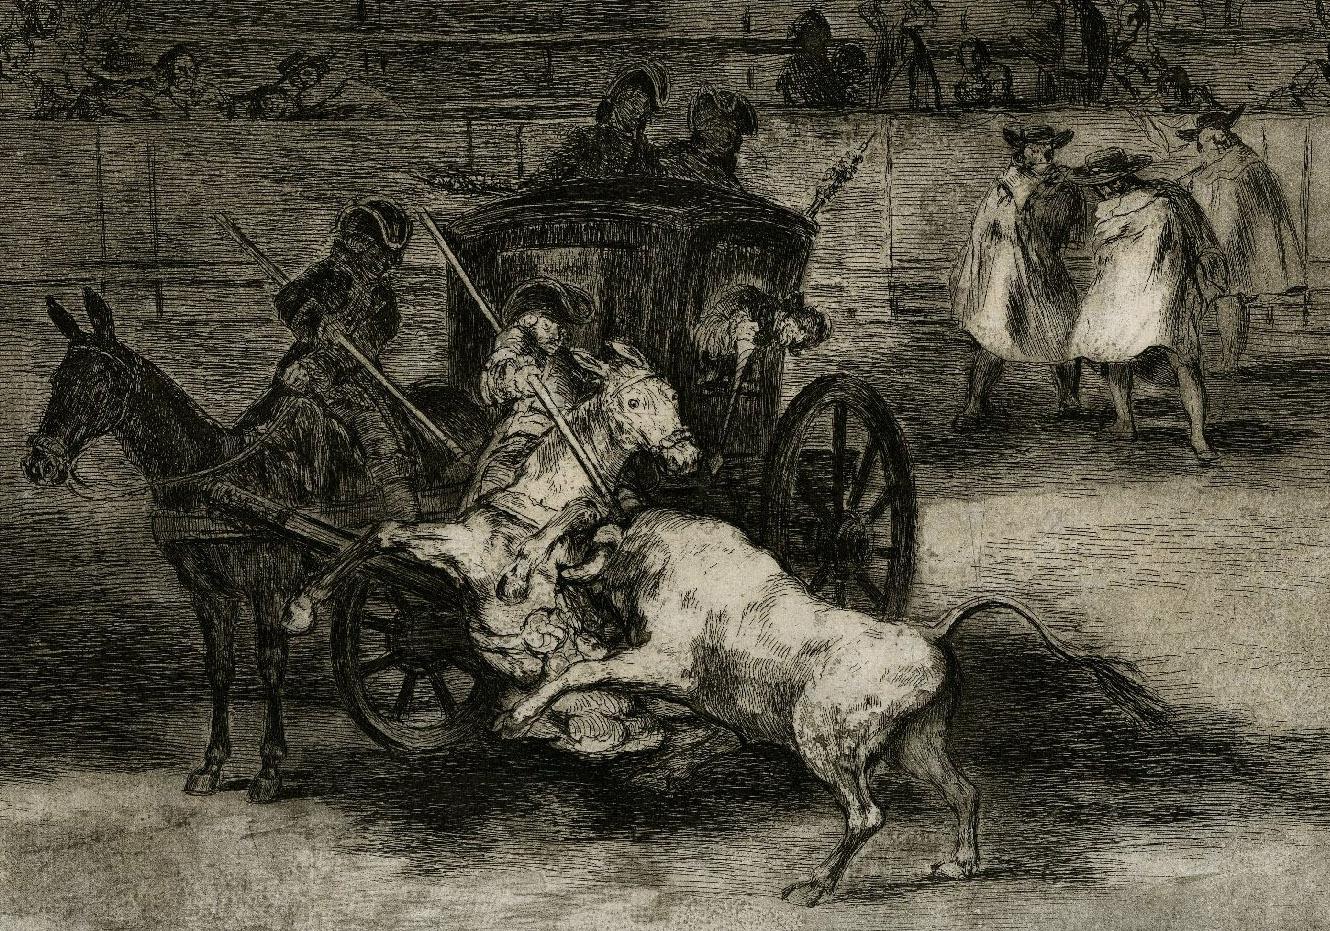 Combat Dans une Voiture Attelee de Deux Mulets (Fight in a carriage harnessed) - Old Masters Print by Francisco Goya